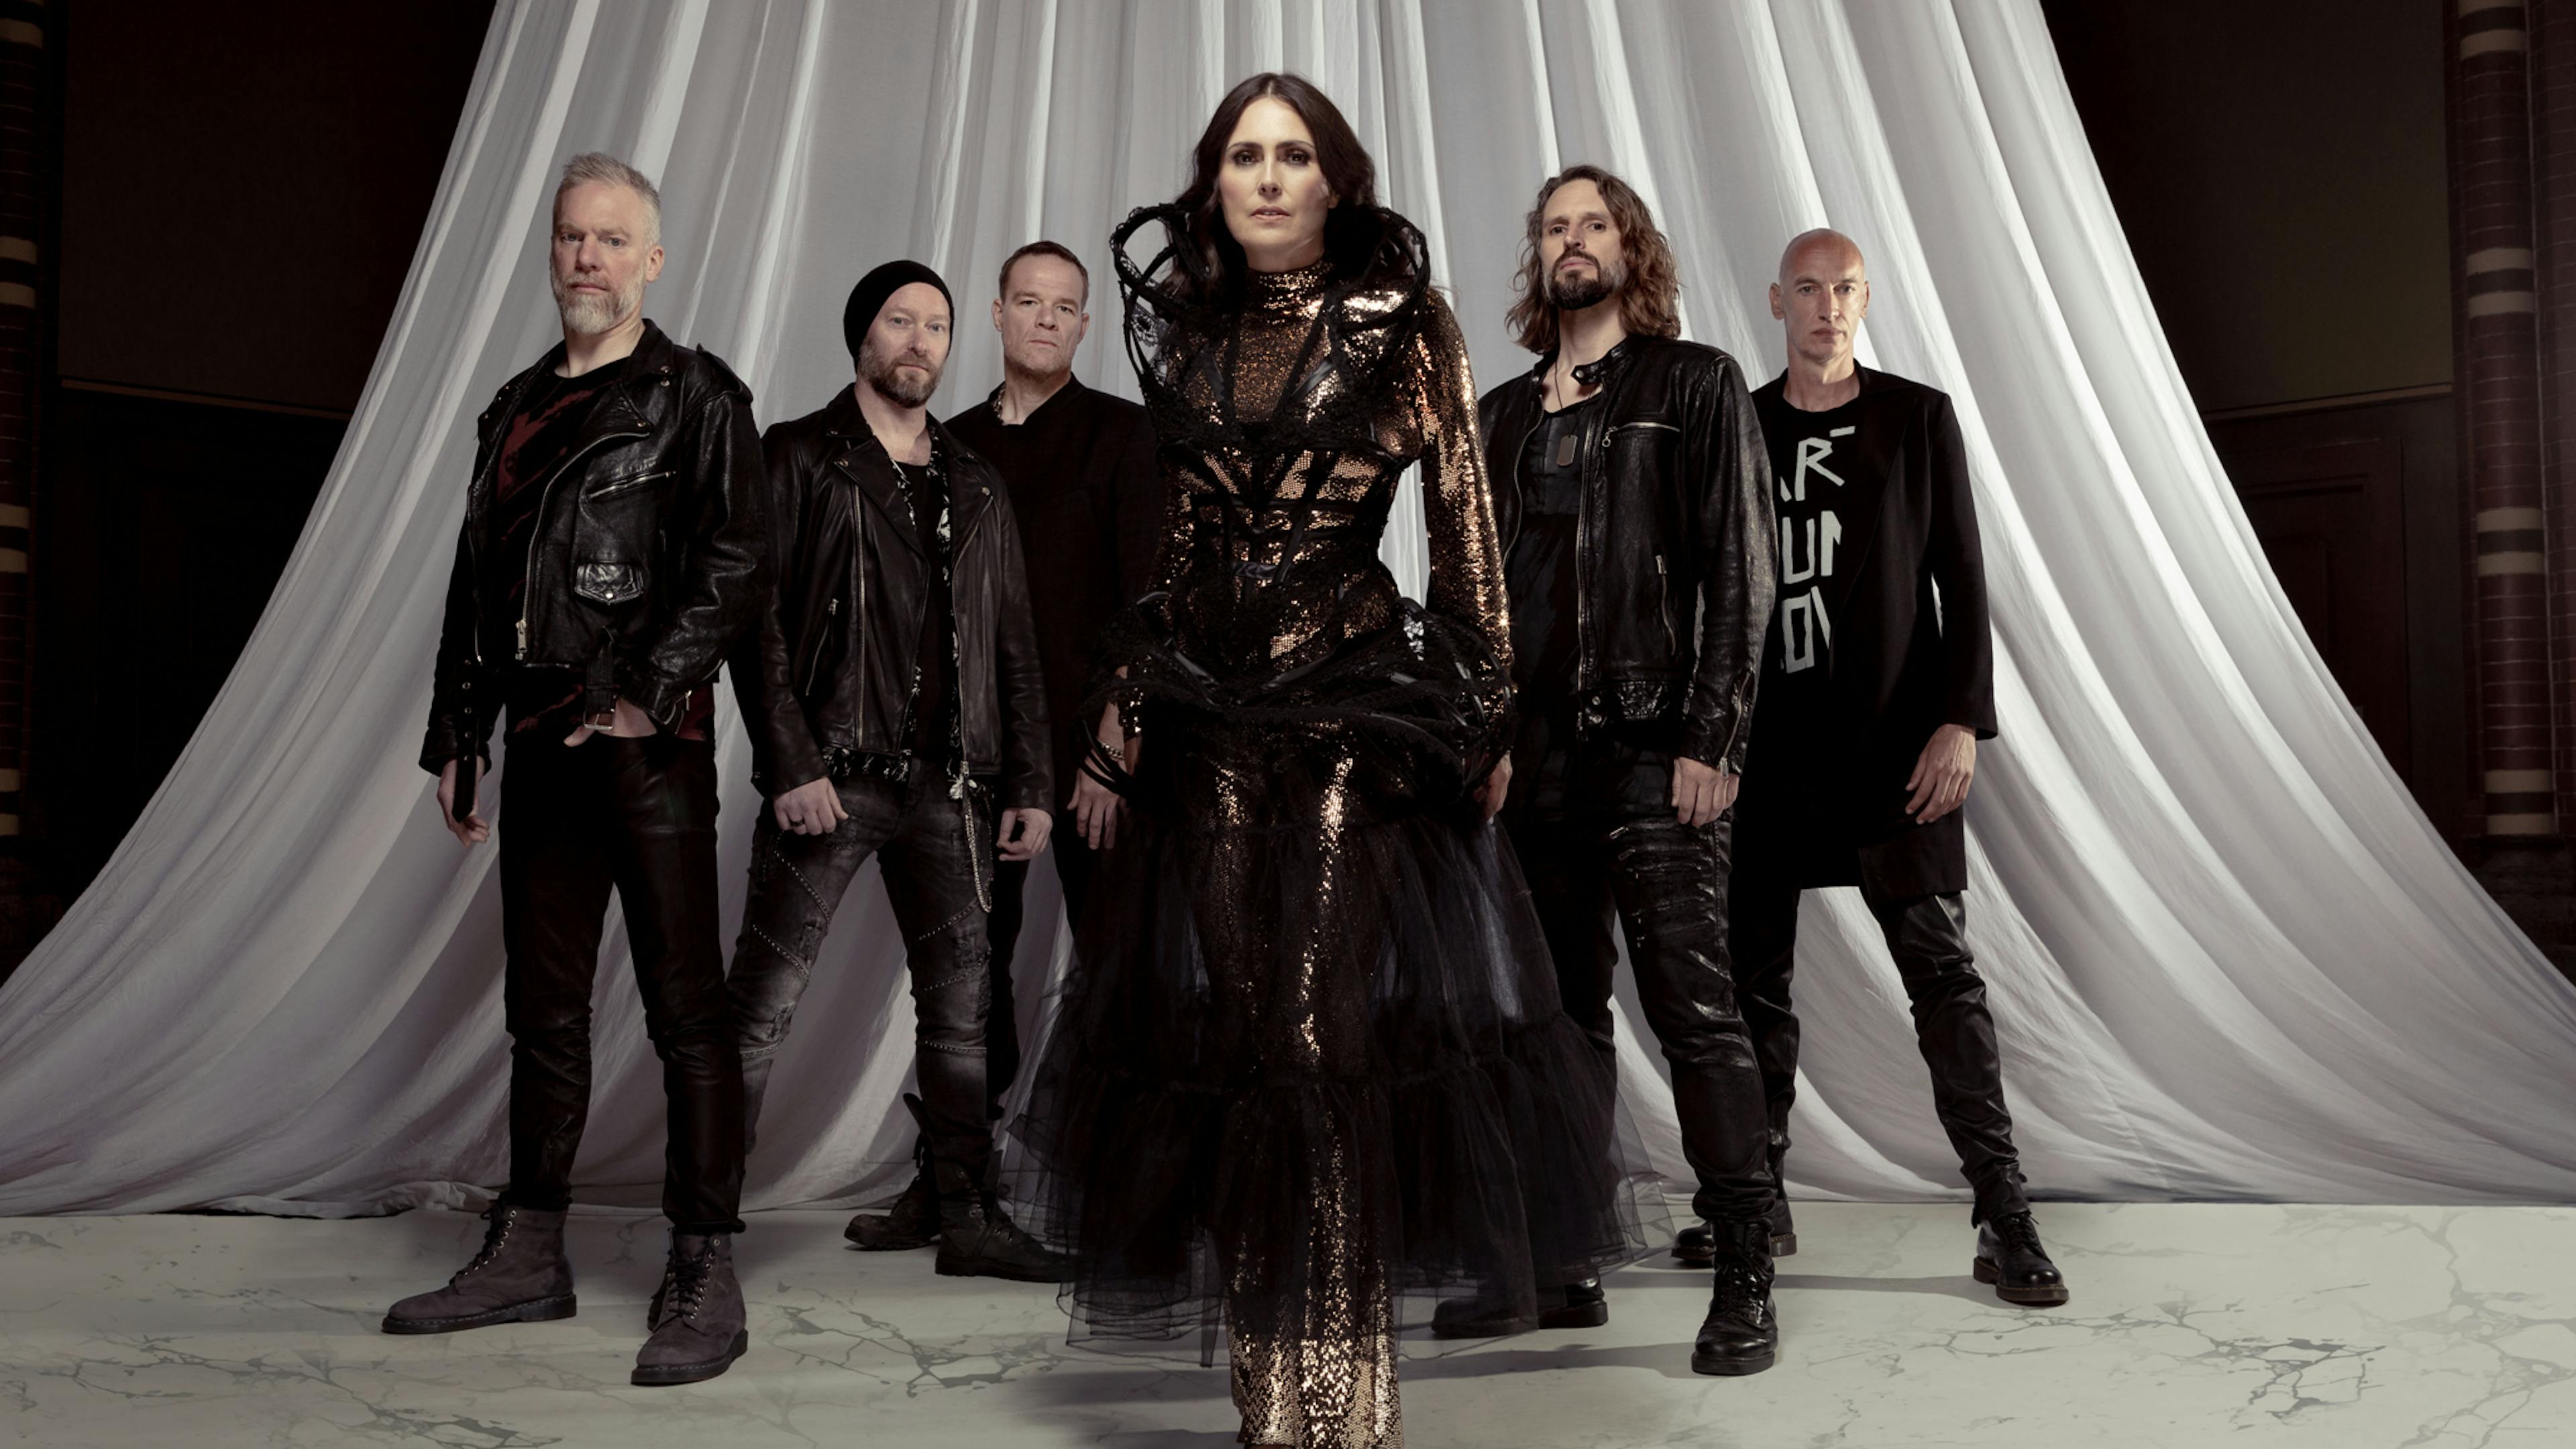 Within Temptation have announced a massive UK and European arena tour